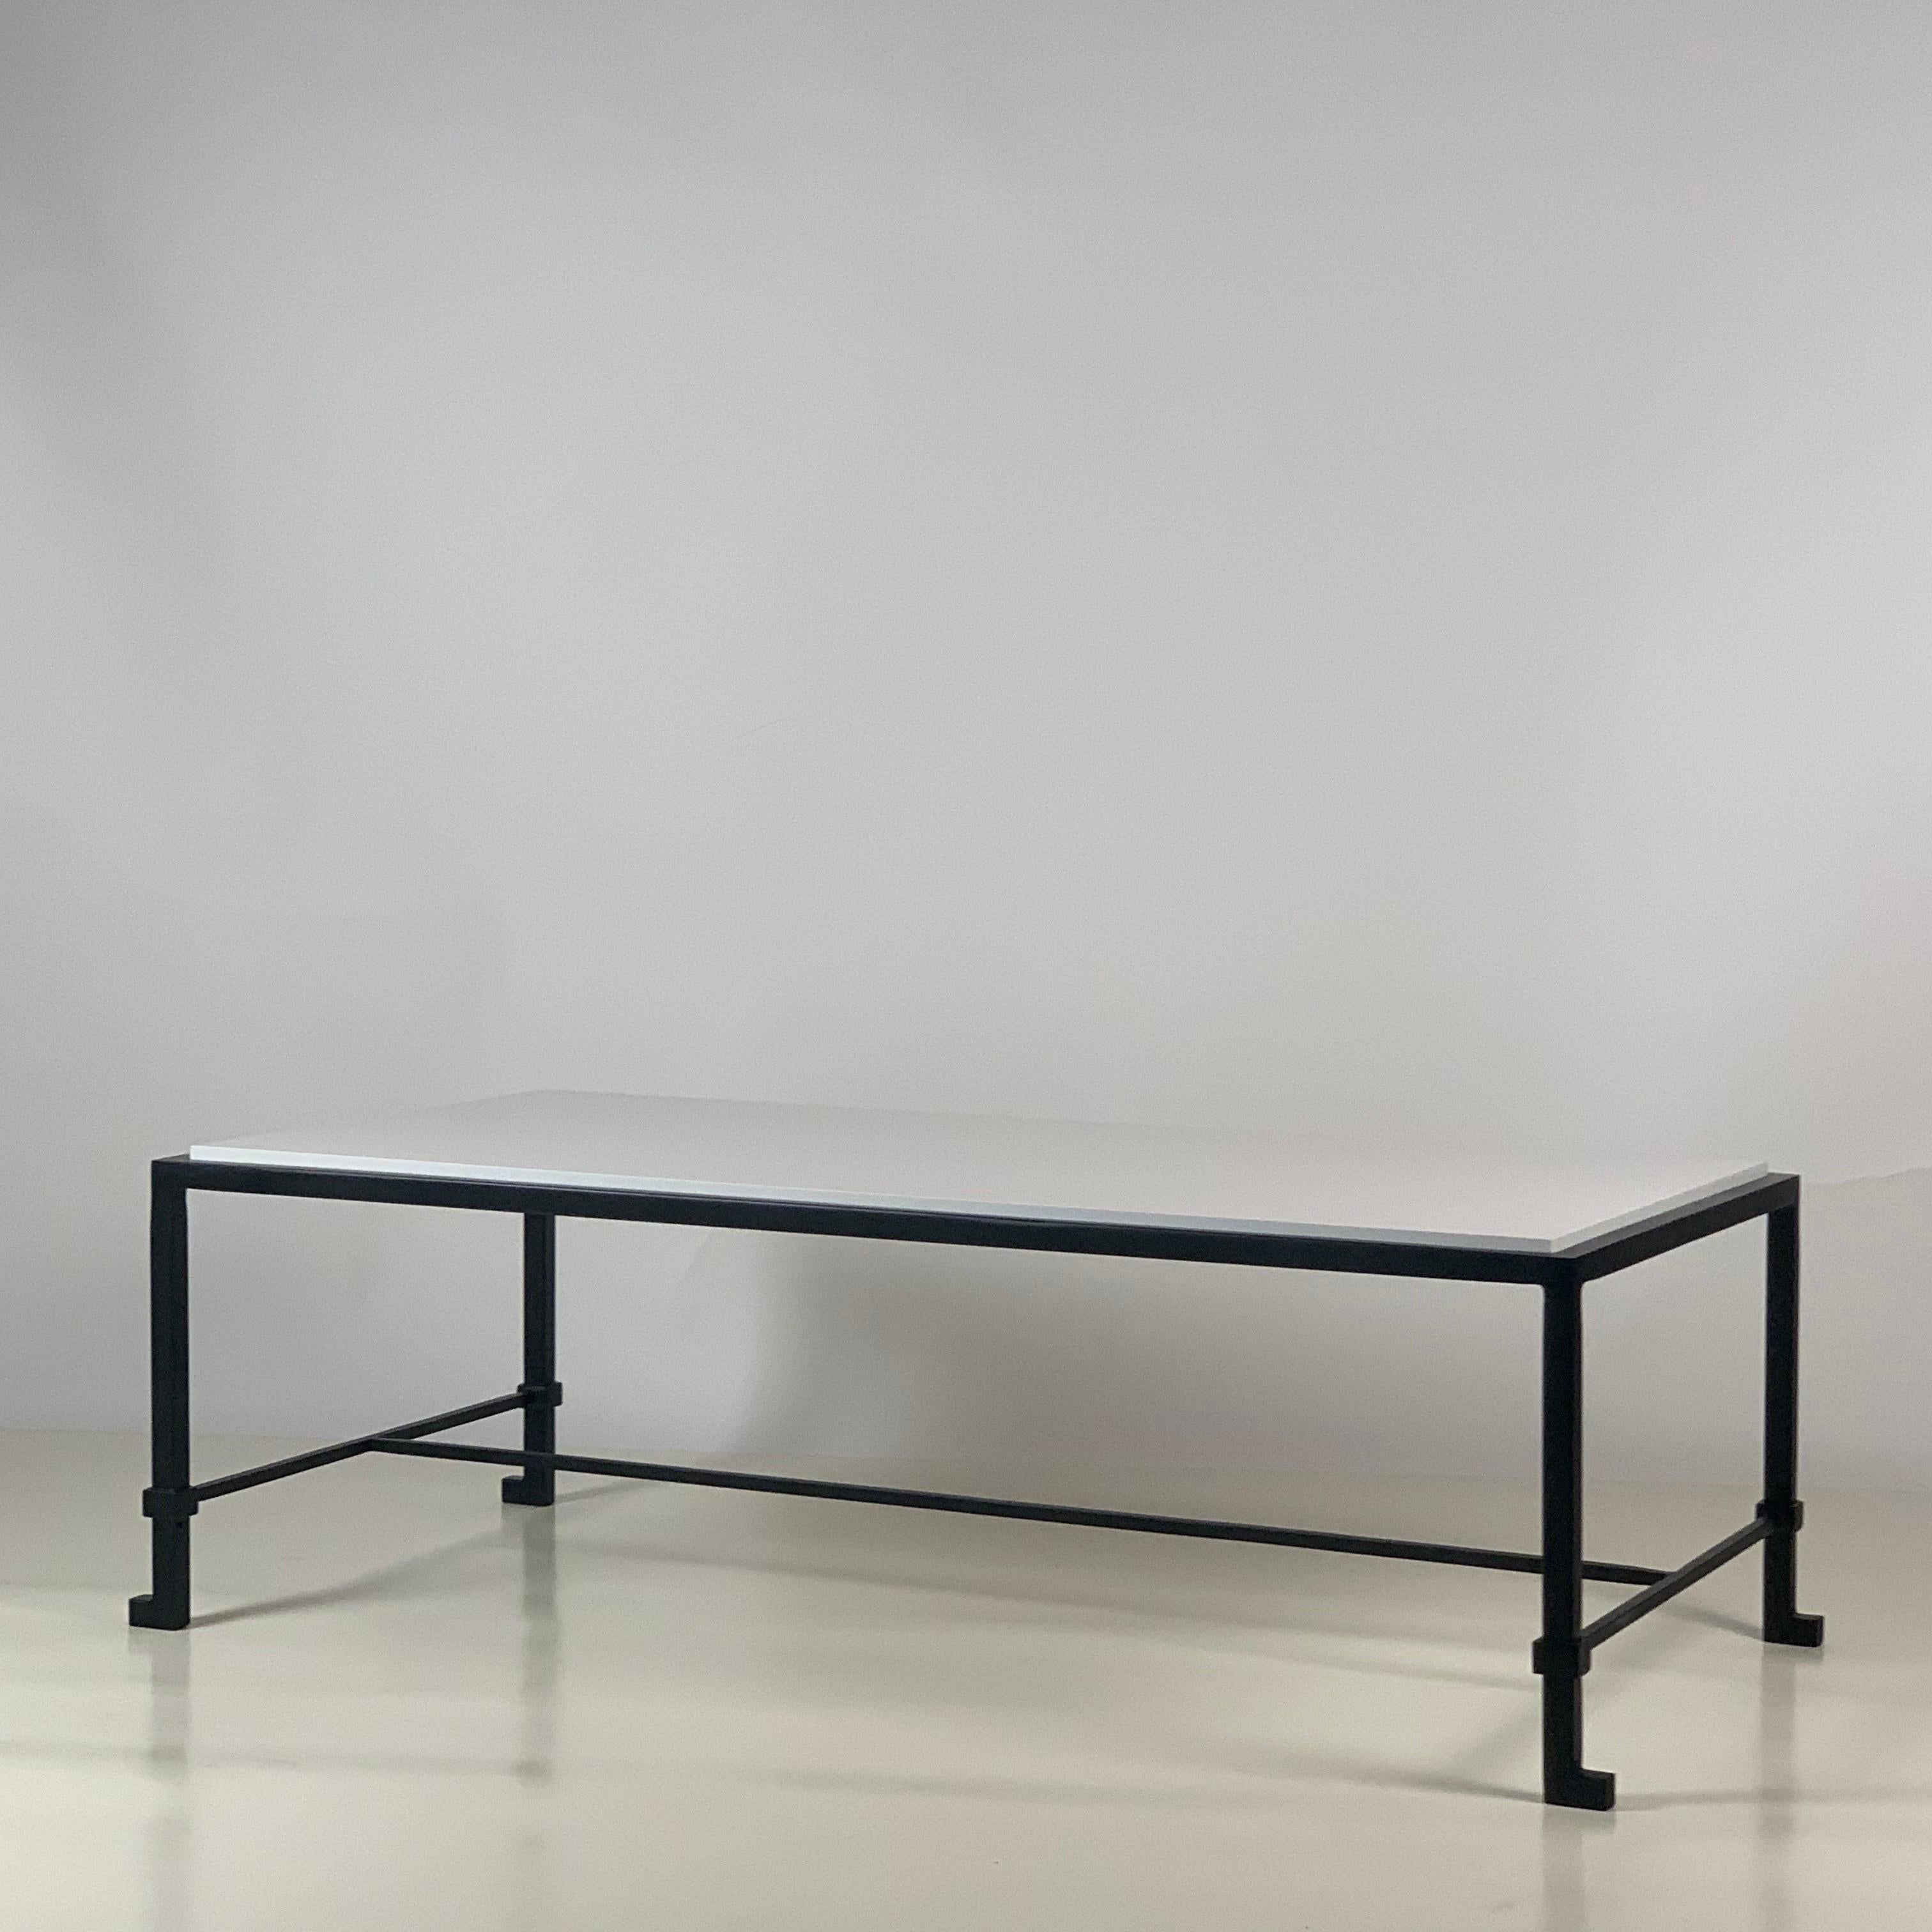 French Chic 'Diagramme' Caesarstone Coffee Table by Design Frères For Sale